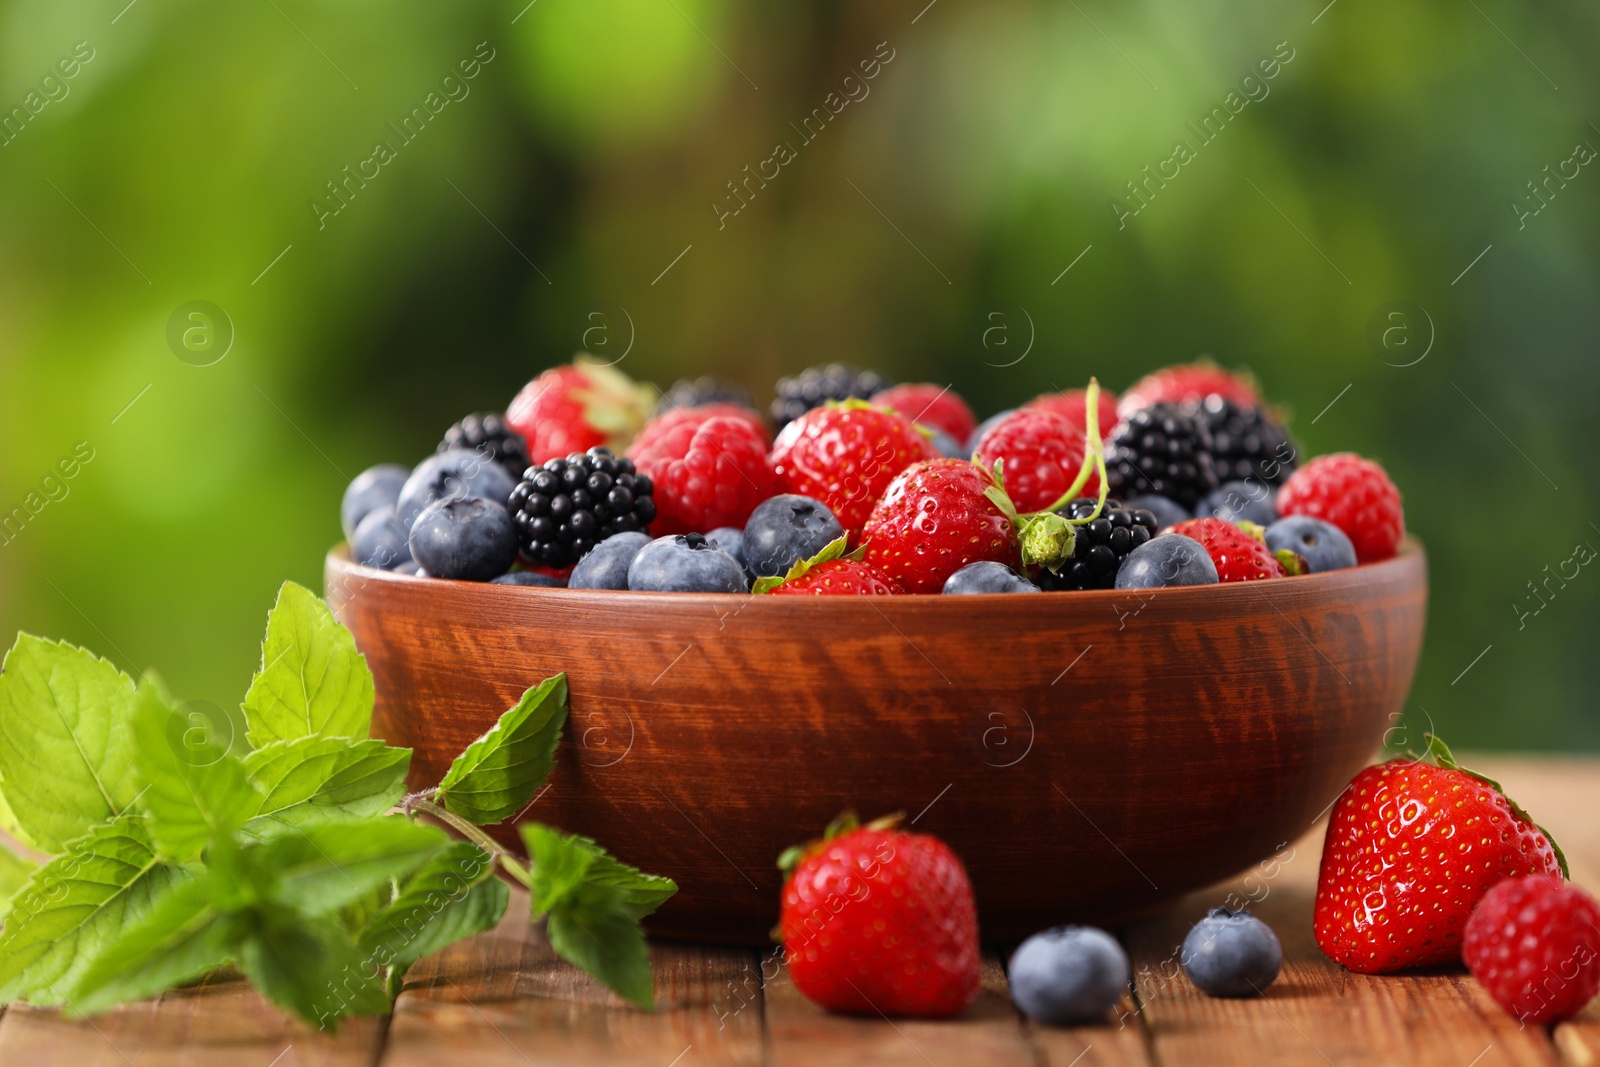 Photo of Bowl with different fresh ripe berries and mint on wooden table outdoors